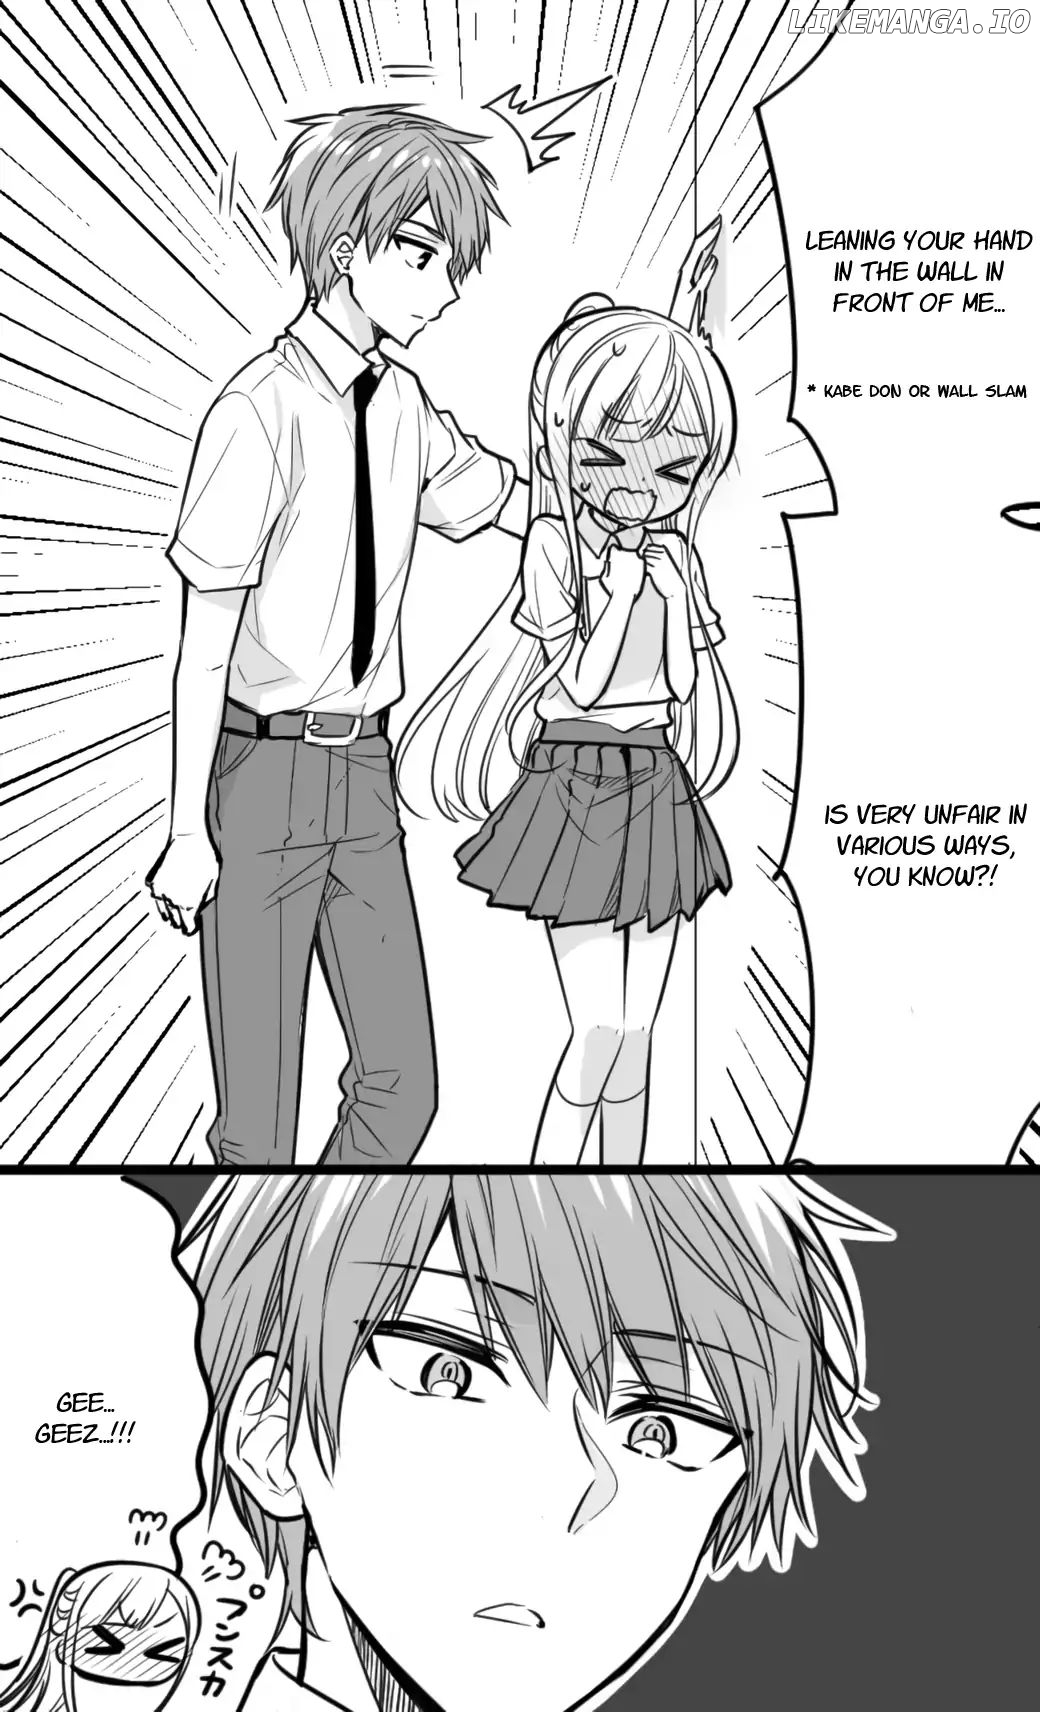 The Reason Why I Can't Look at His Eyes Directly chapter 3 - page 2